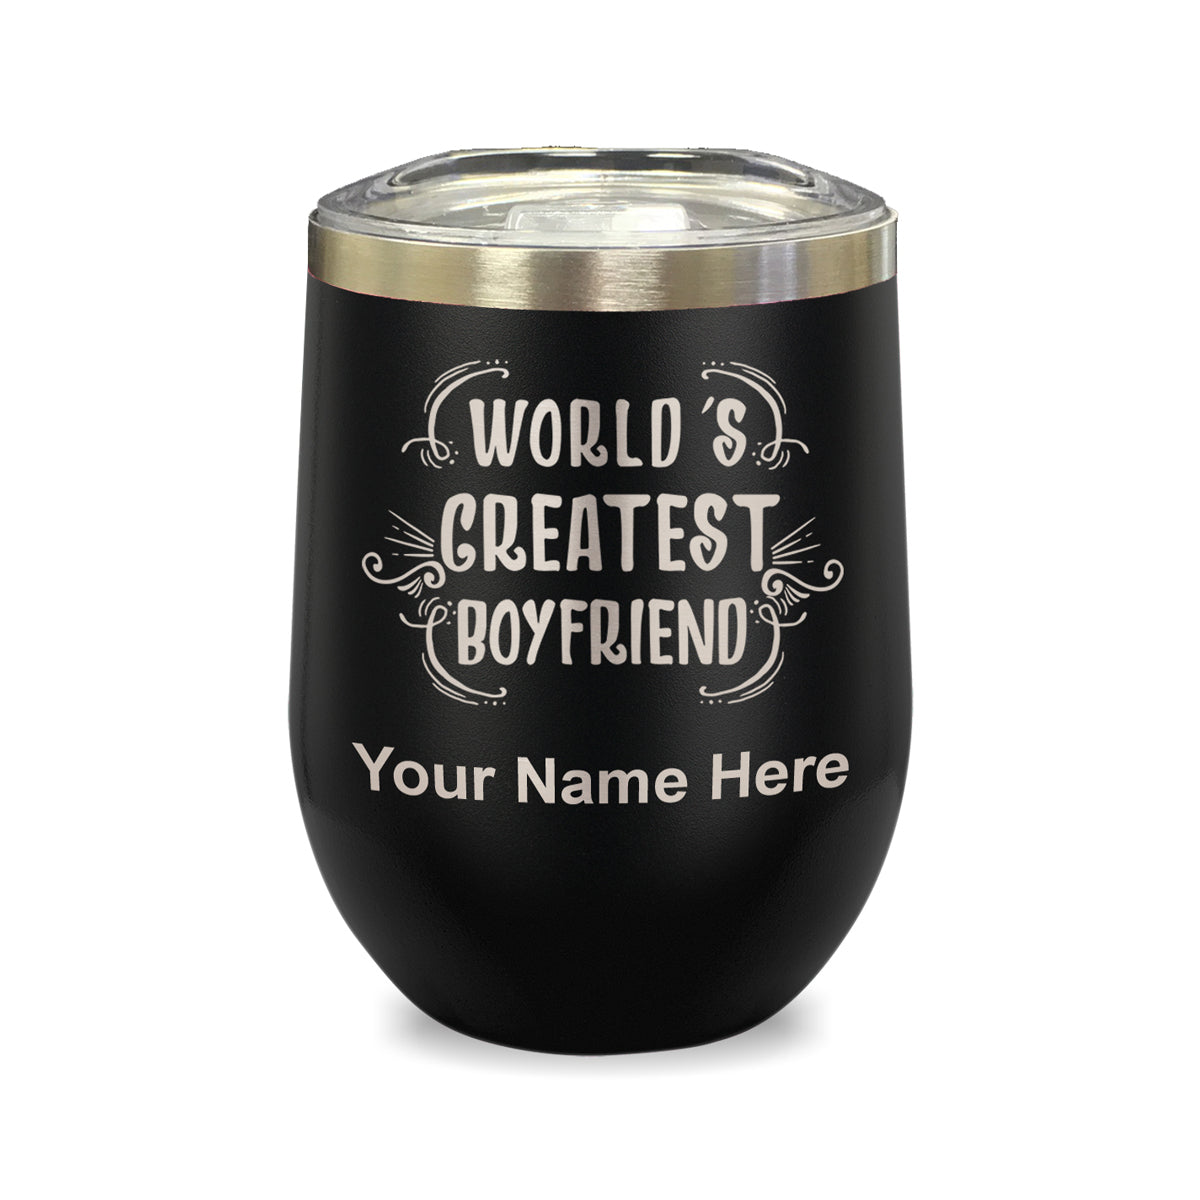 LaserGram Double Wall Stainless Steel Wine Glass, World's Greatest Boyfriend, Personalized Engraving Included